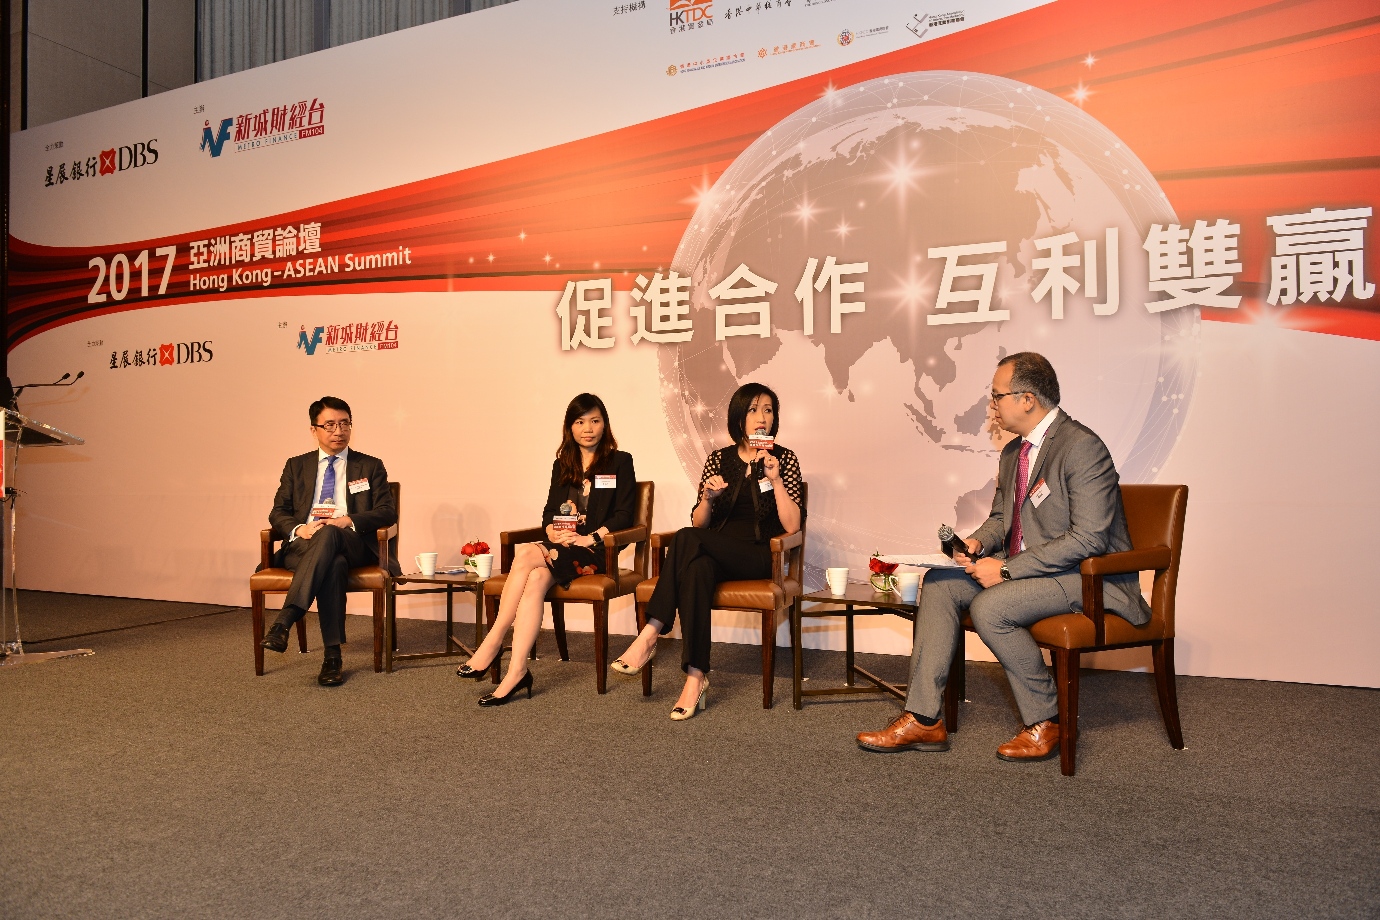 Photo 7: Panel discussion with Dr. Lawrence Cheung, Director, Technology Development, Hong Kong Productivity Council, Ms. Venetia Lee, General Manager of Alipay Hong Kong, Macau and Taiwan, and Ms. Karen Chan, who founded the Hong Kong O2O E-Commerce Association, exploring e-commerce and O2O marketing business opportunities.